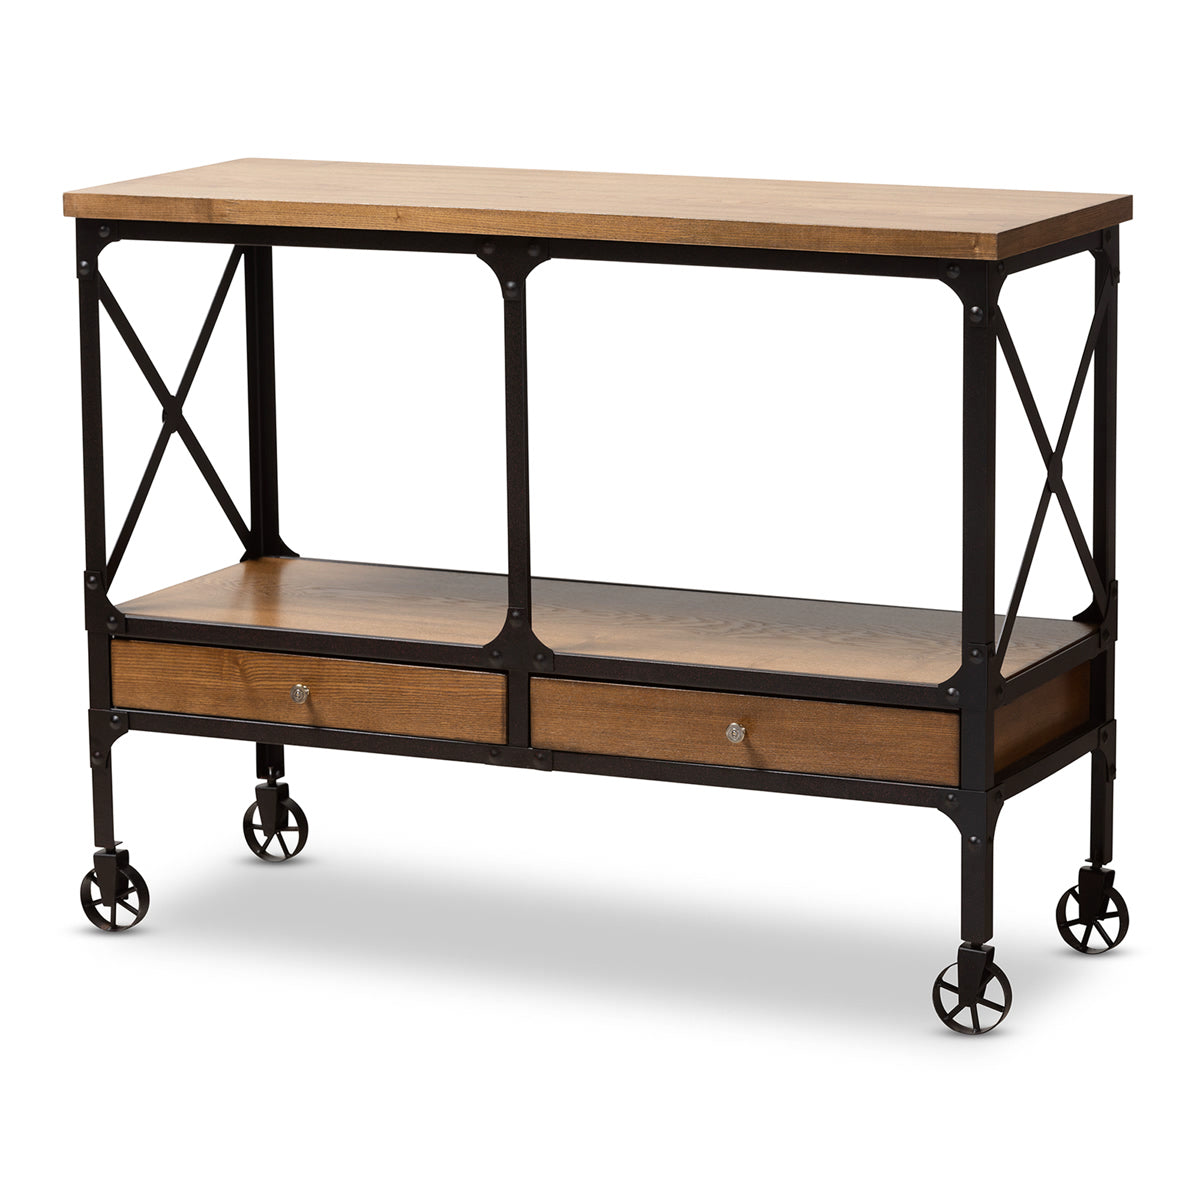 Baxton Studio Alves Vintage Rustic Industrial Style Wood and Dark Bronze Finished Metal Wheeled Console Table with Drawers Baxton Studio-0-Minimal And Modern - 1